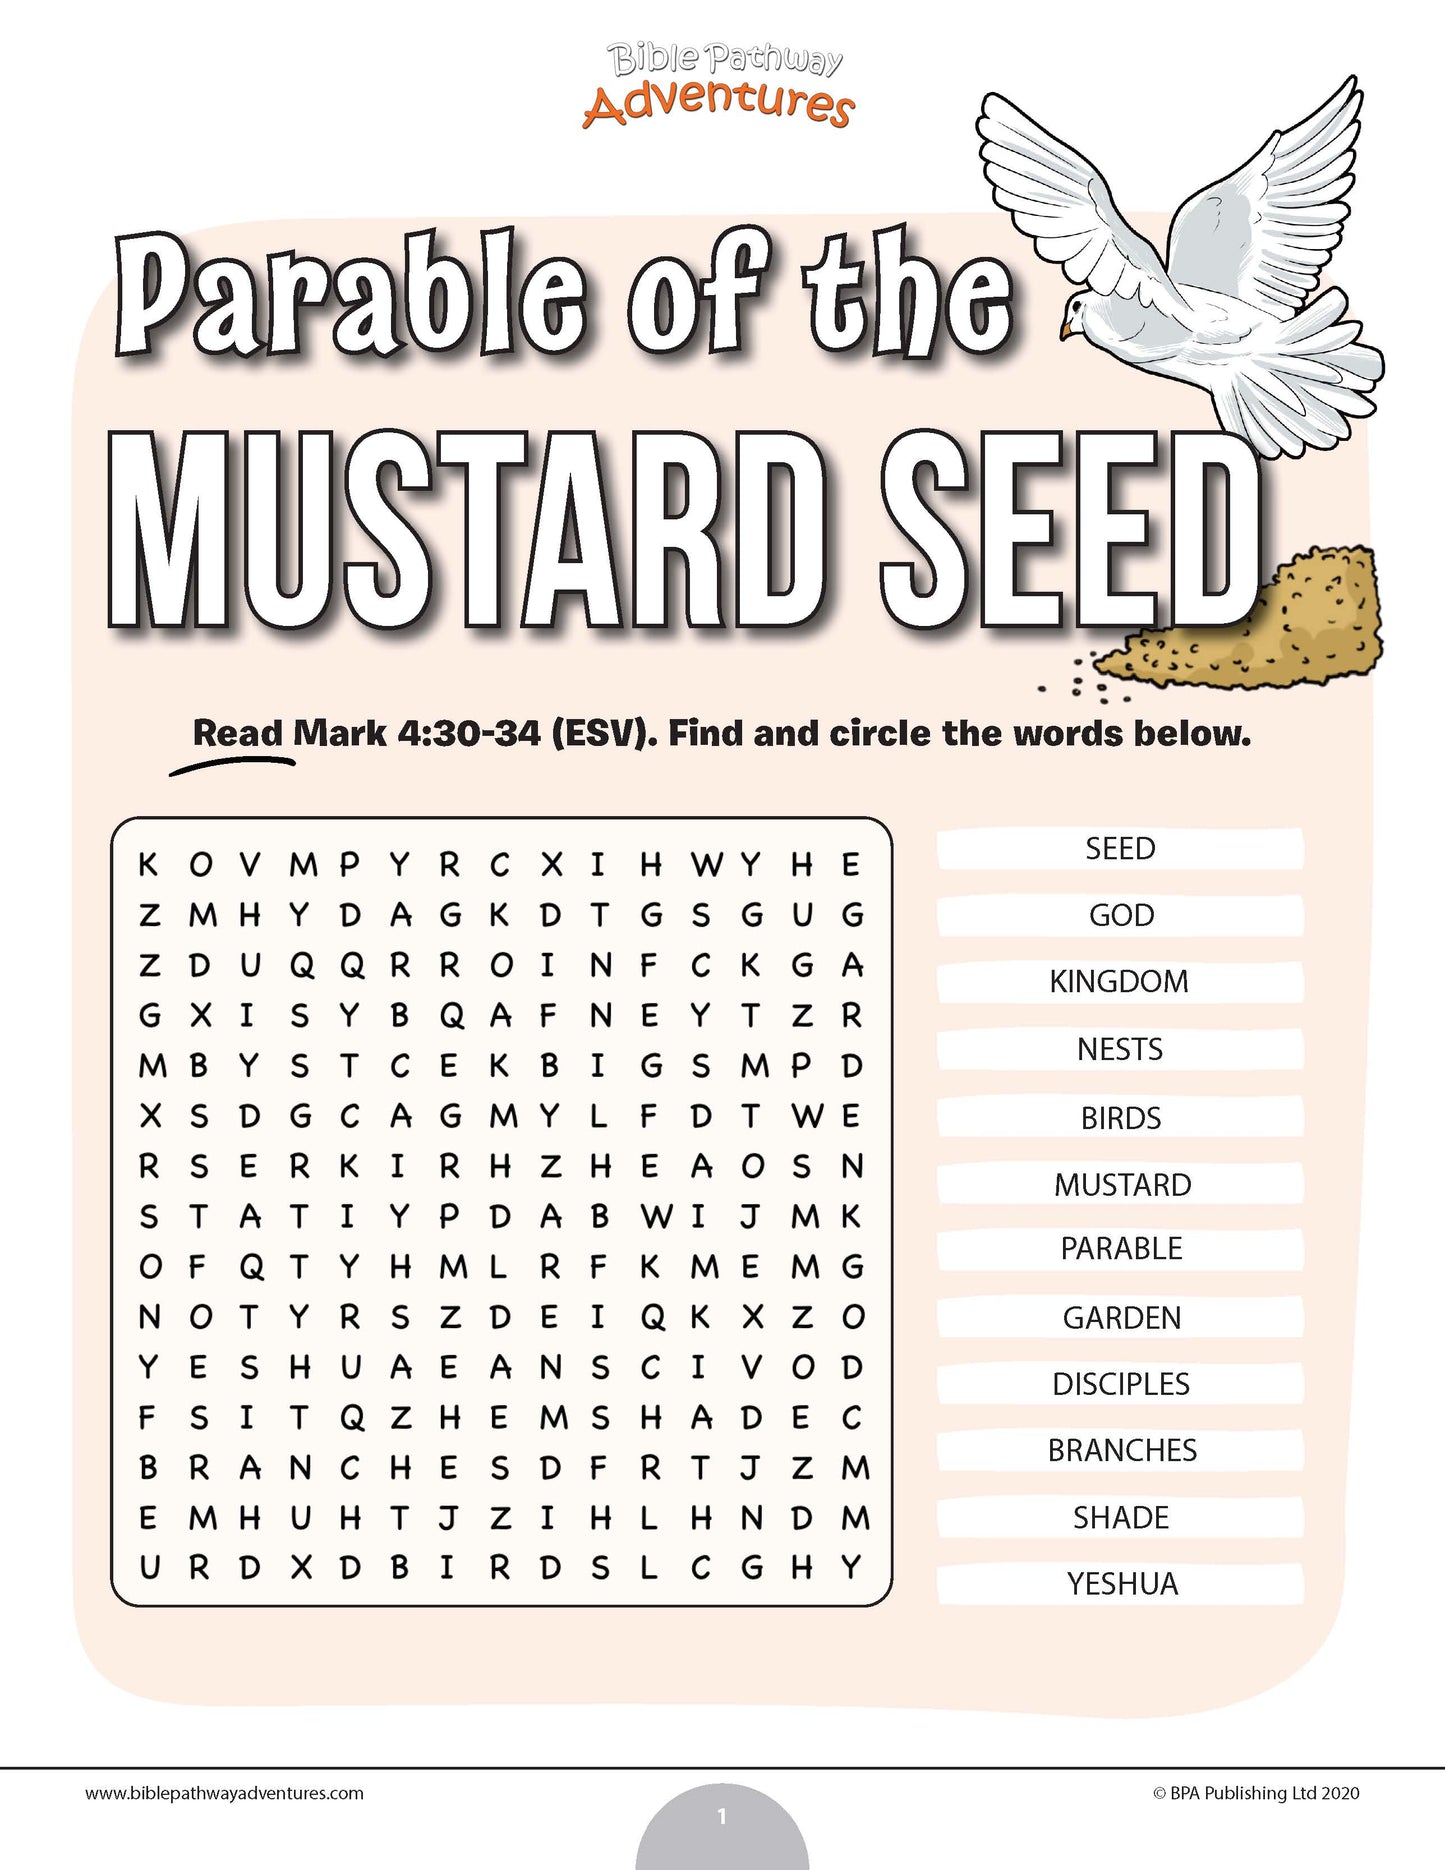 Parable of the Mustard Seed word search (PDF)